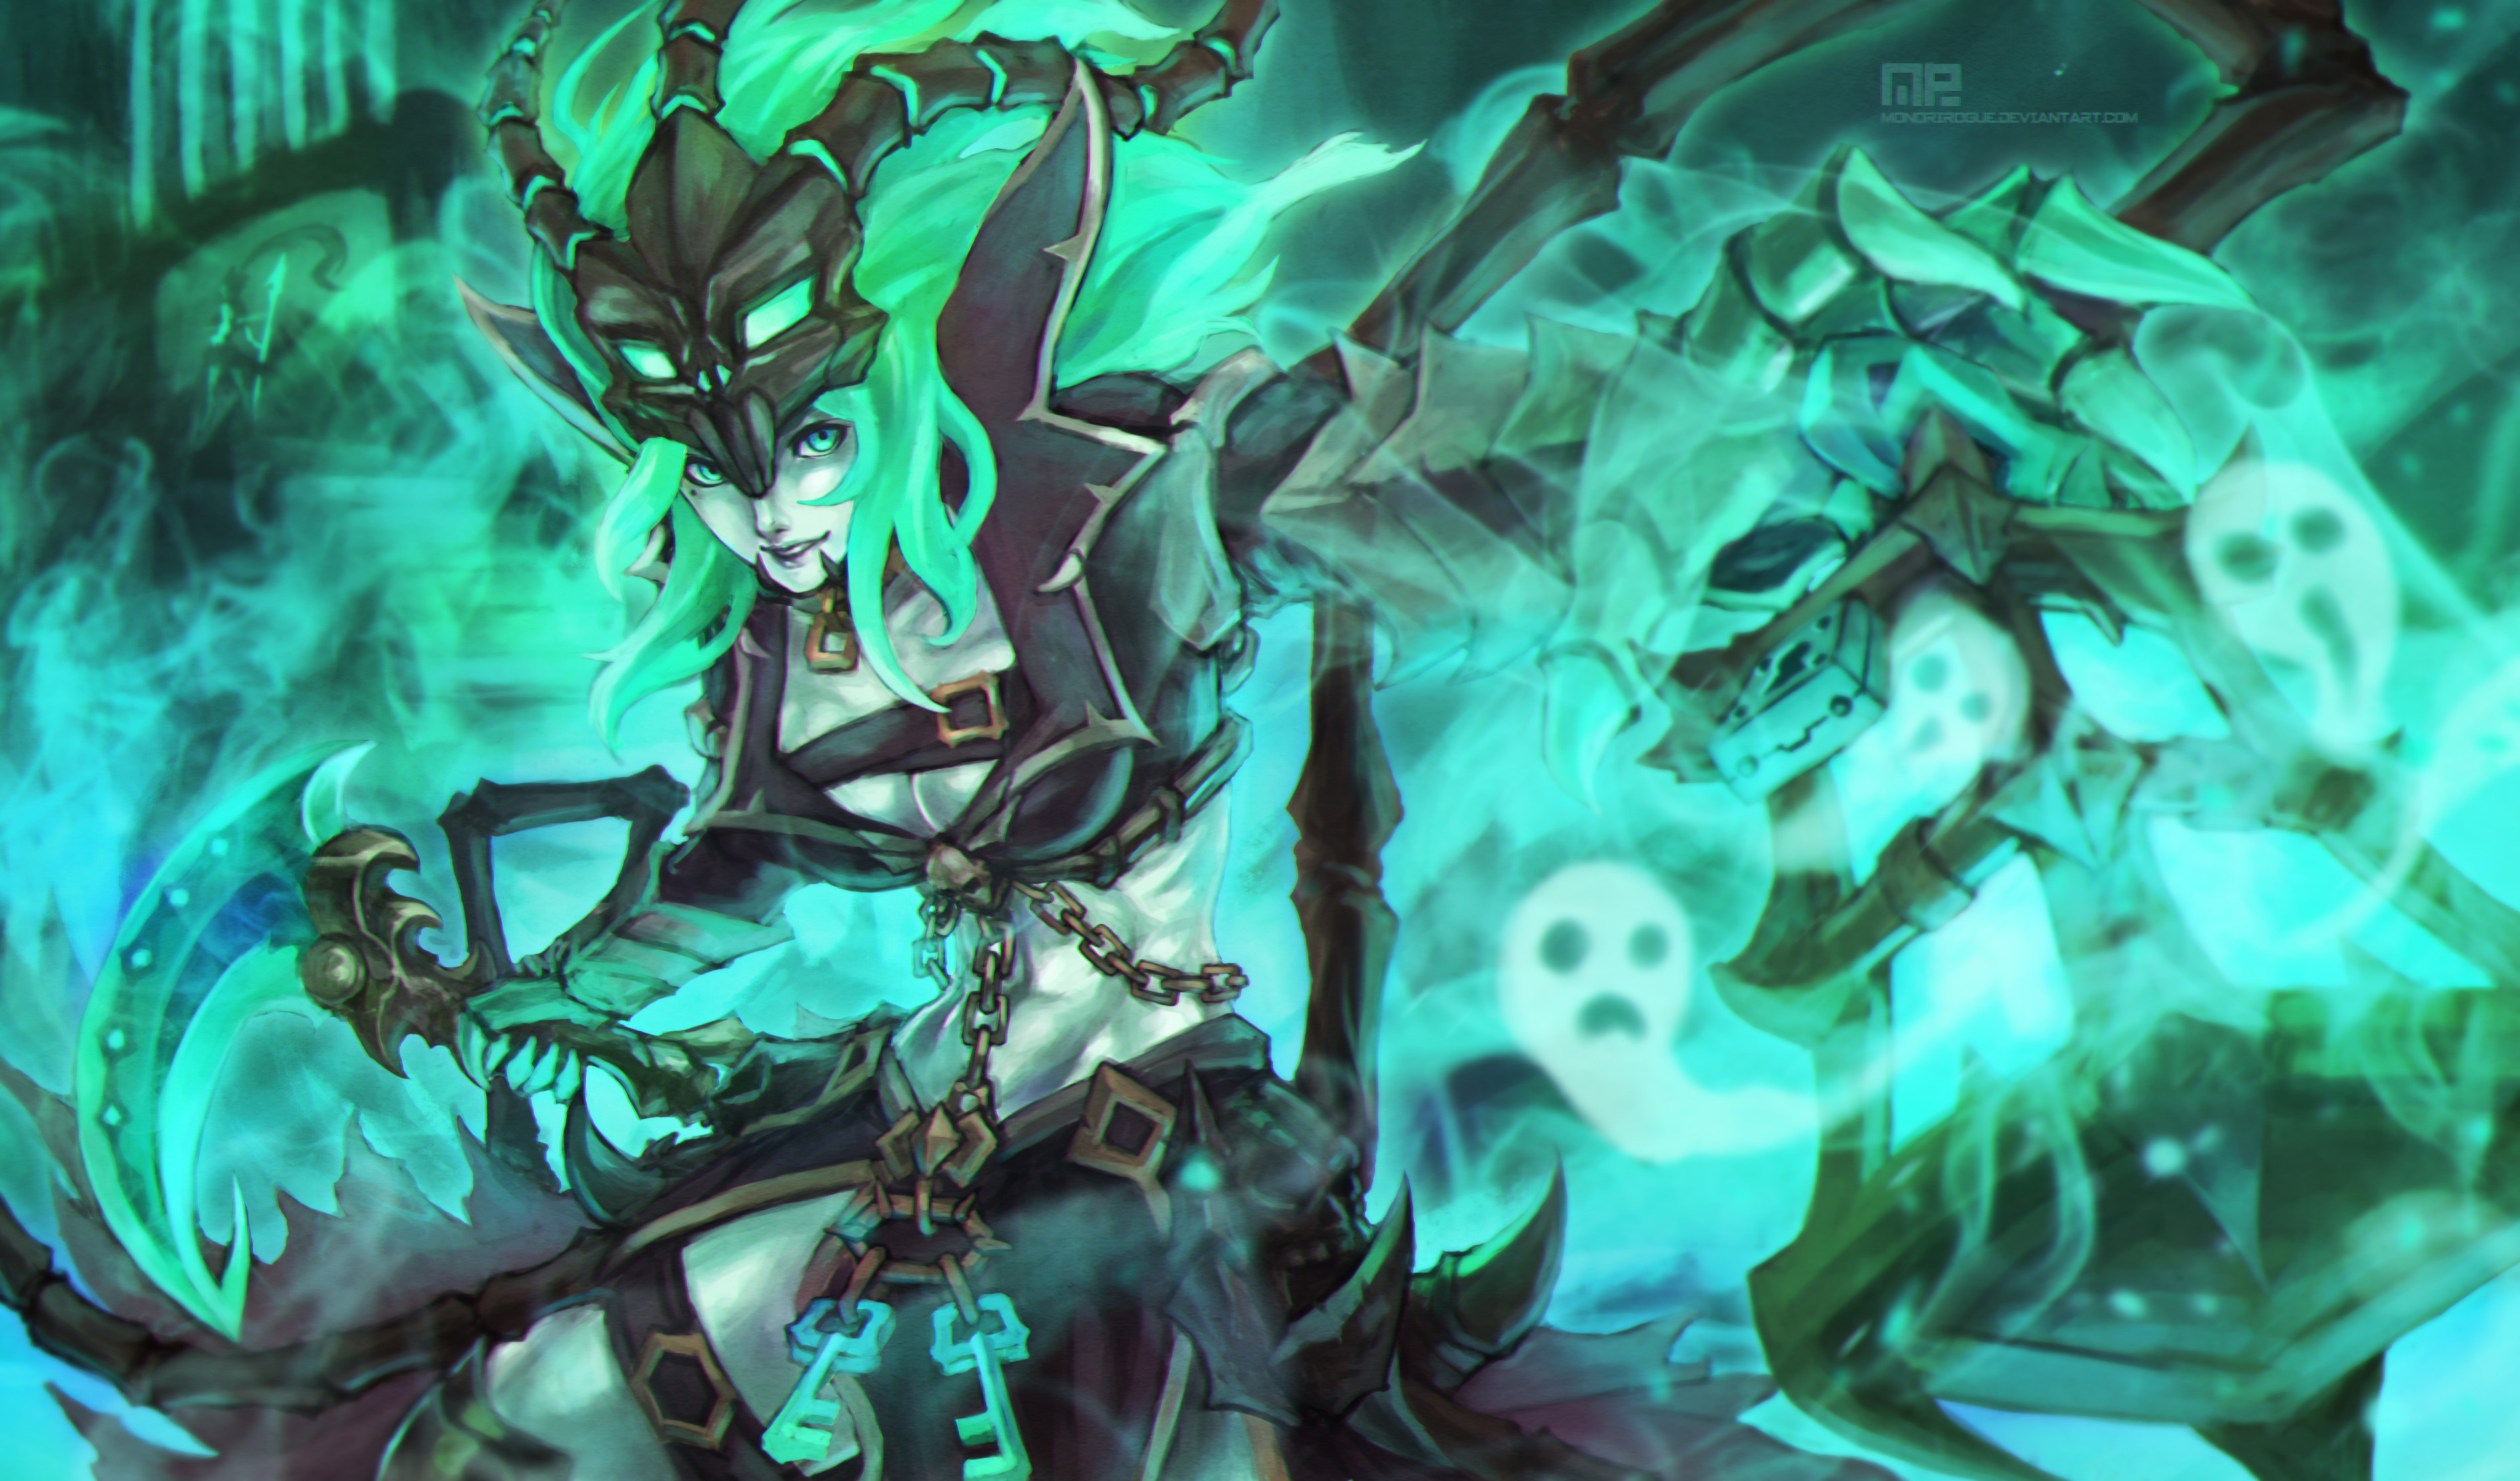 General 3777x2220 League of Legends Thresh (League Of Legends) fantasy girl PC gaming green video games fan art DeviantArt video game girls video game characters